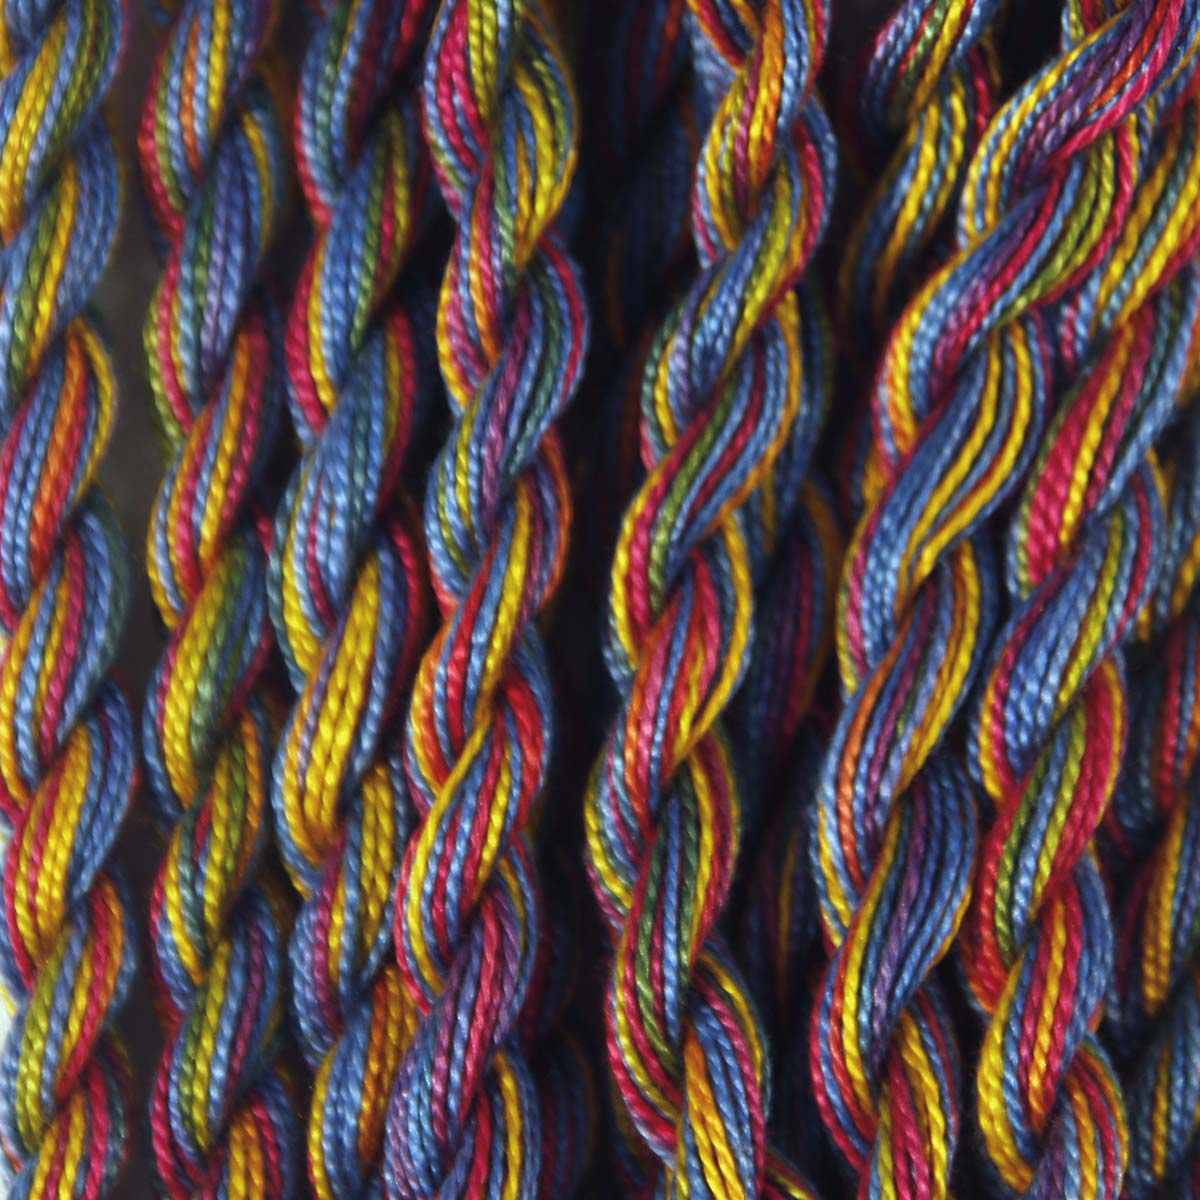 www.colourstreams.com.au Colour Streams Hand Dyed Cotton Threads Cotto Strands Slow Stitch Embroidery Textile Arts Fibre DL 15 Marrakesh Yellows Reds Purples Pinks Greens Blues